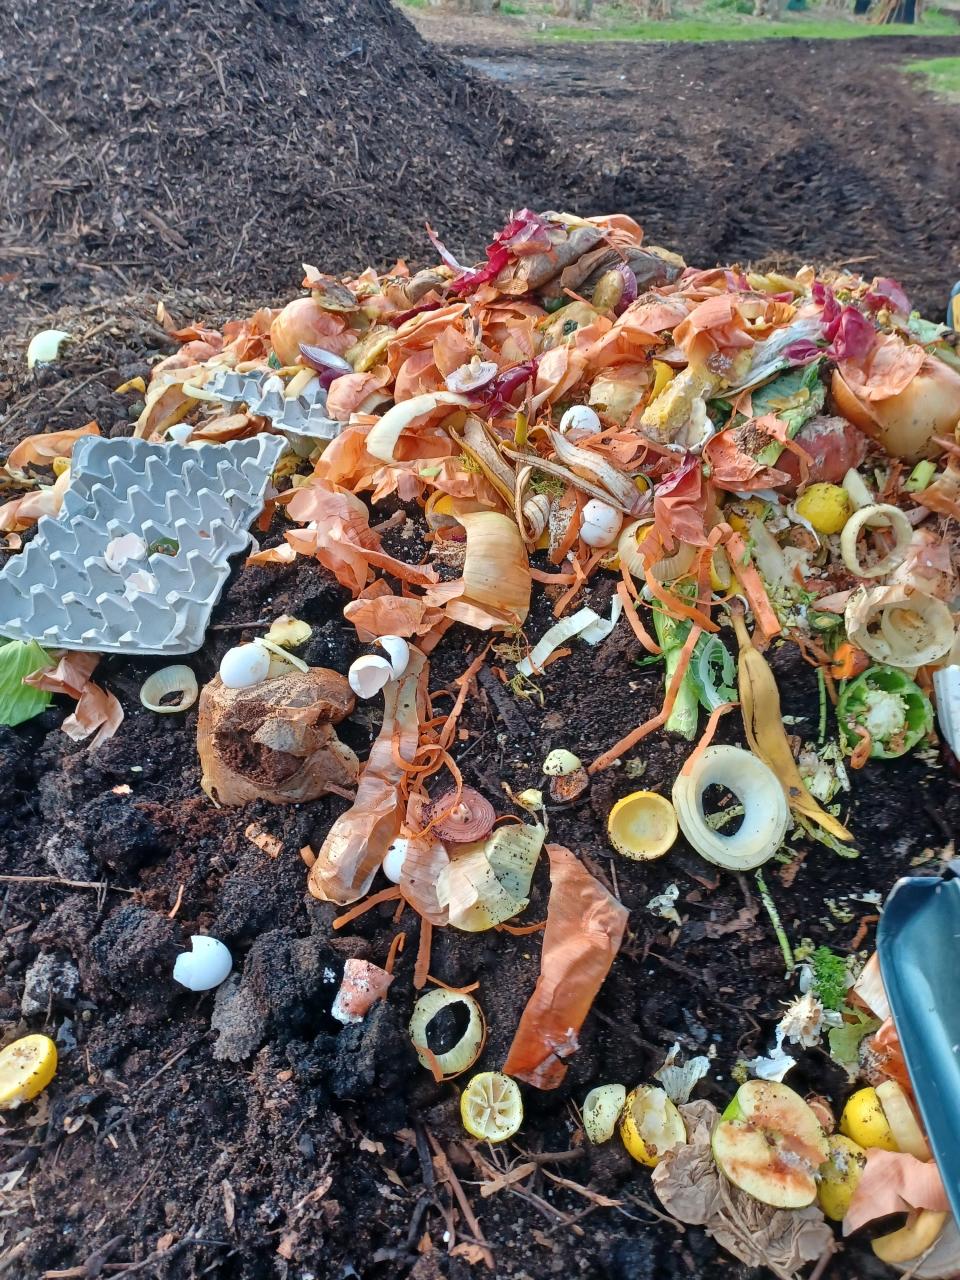 Raw food scraps and other recyclables being added to an existing compost pile at Compost Community.